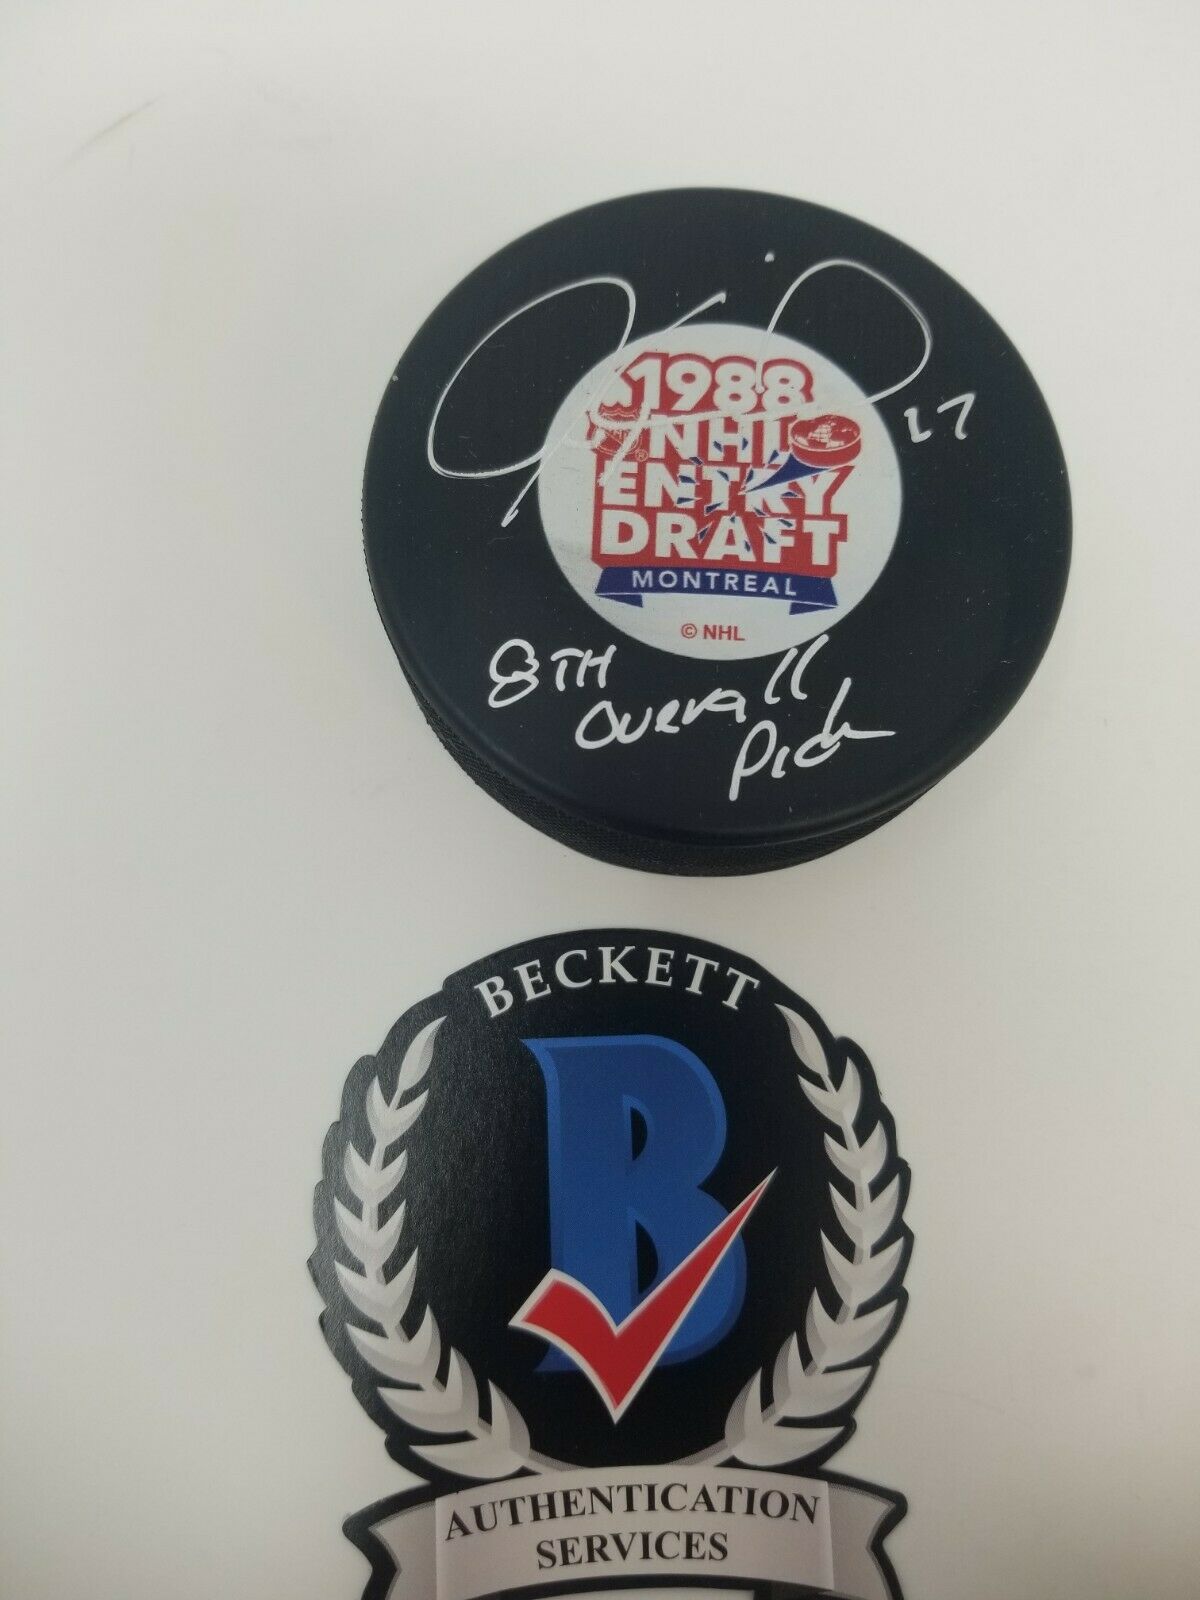 Jeremy Roenick Signed 1988 Draft Puck 8th Overall Inscription Blackhawks Bas